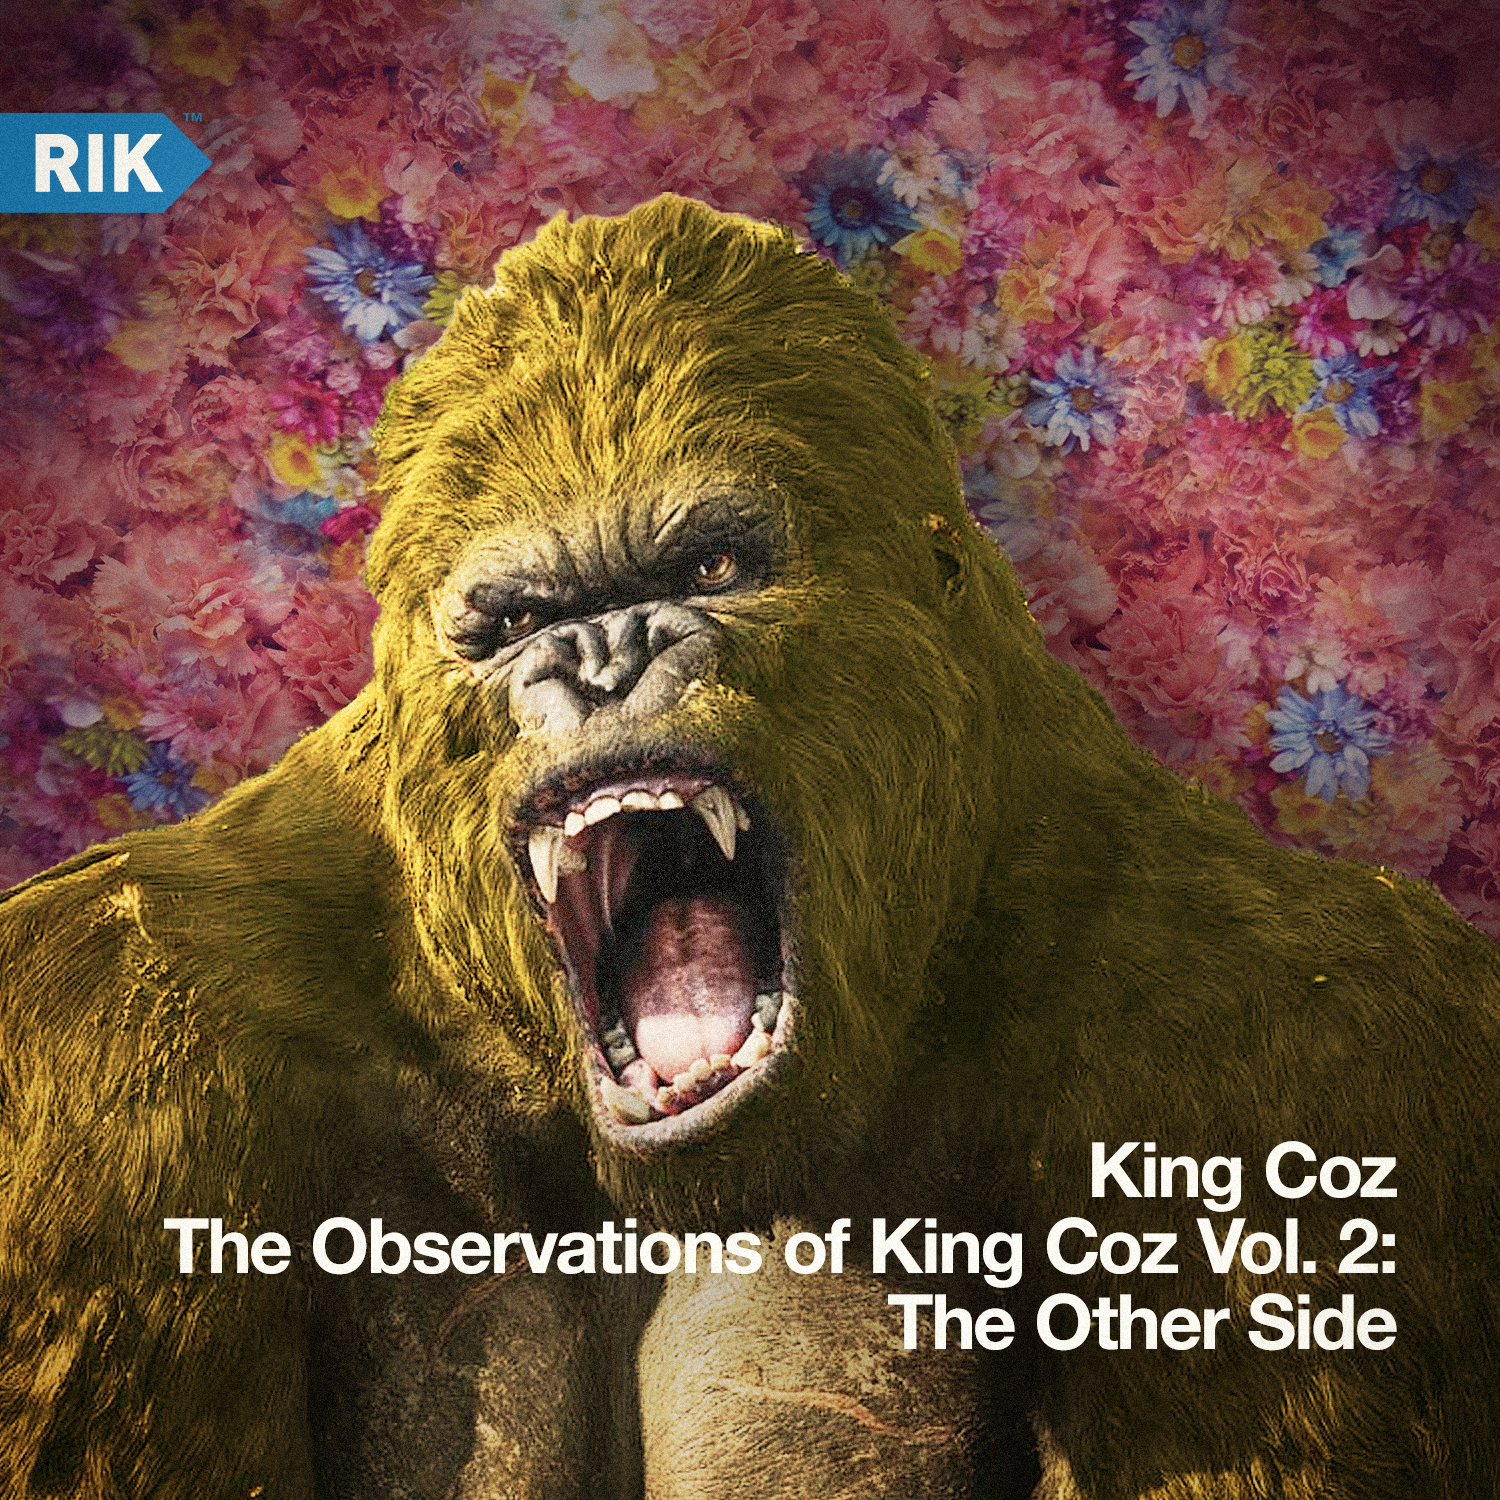 King Coz — The Observations of King Coz Vol 2: The Other Side